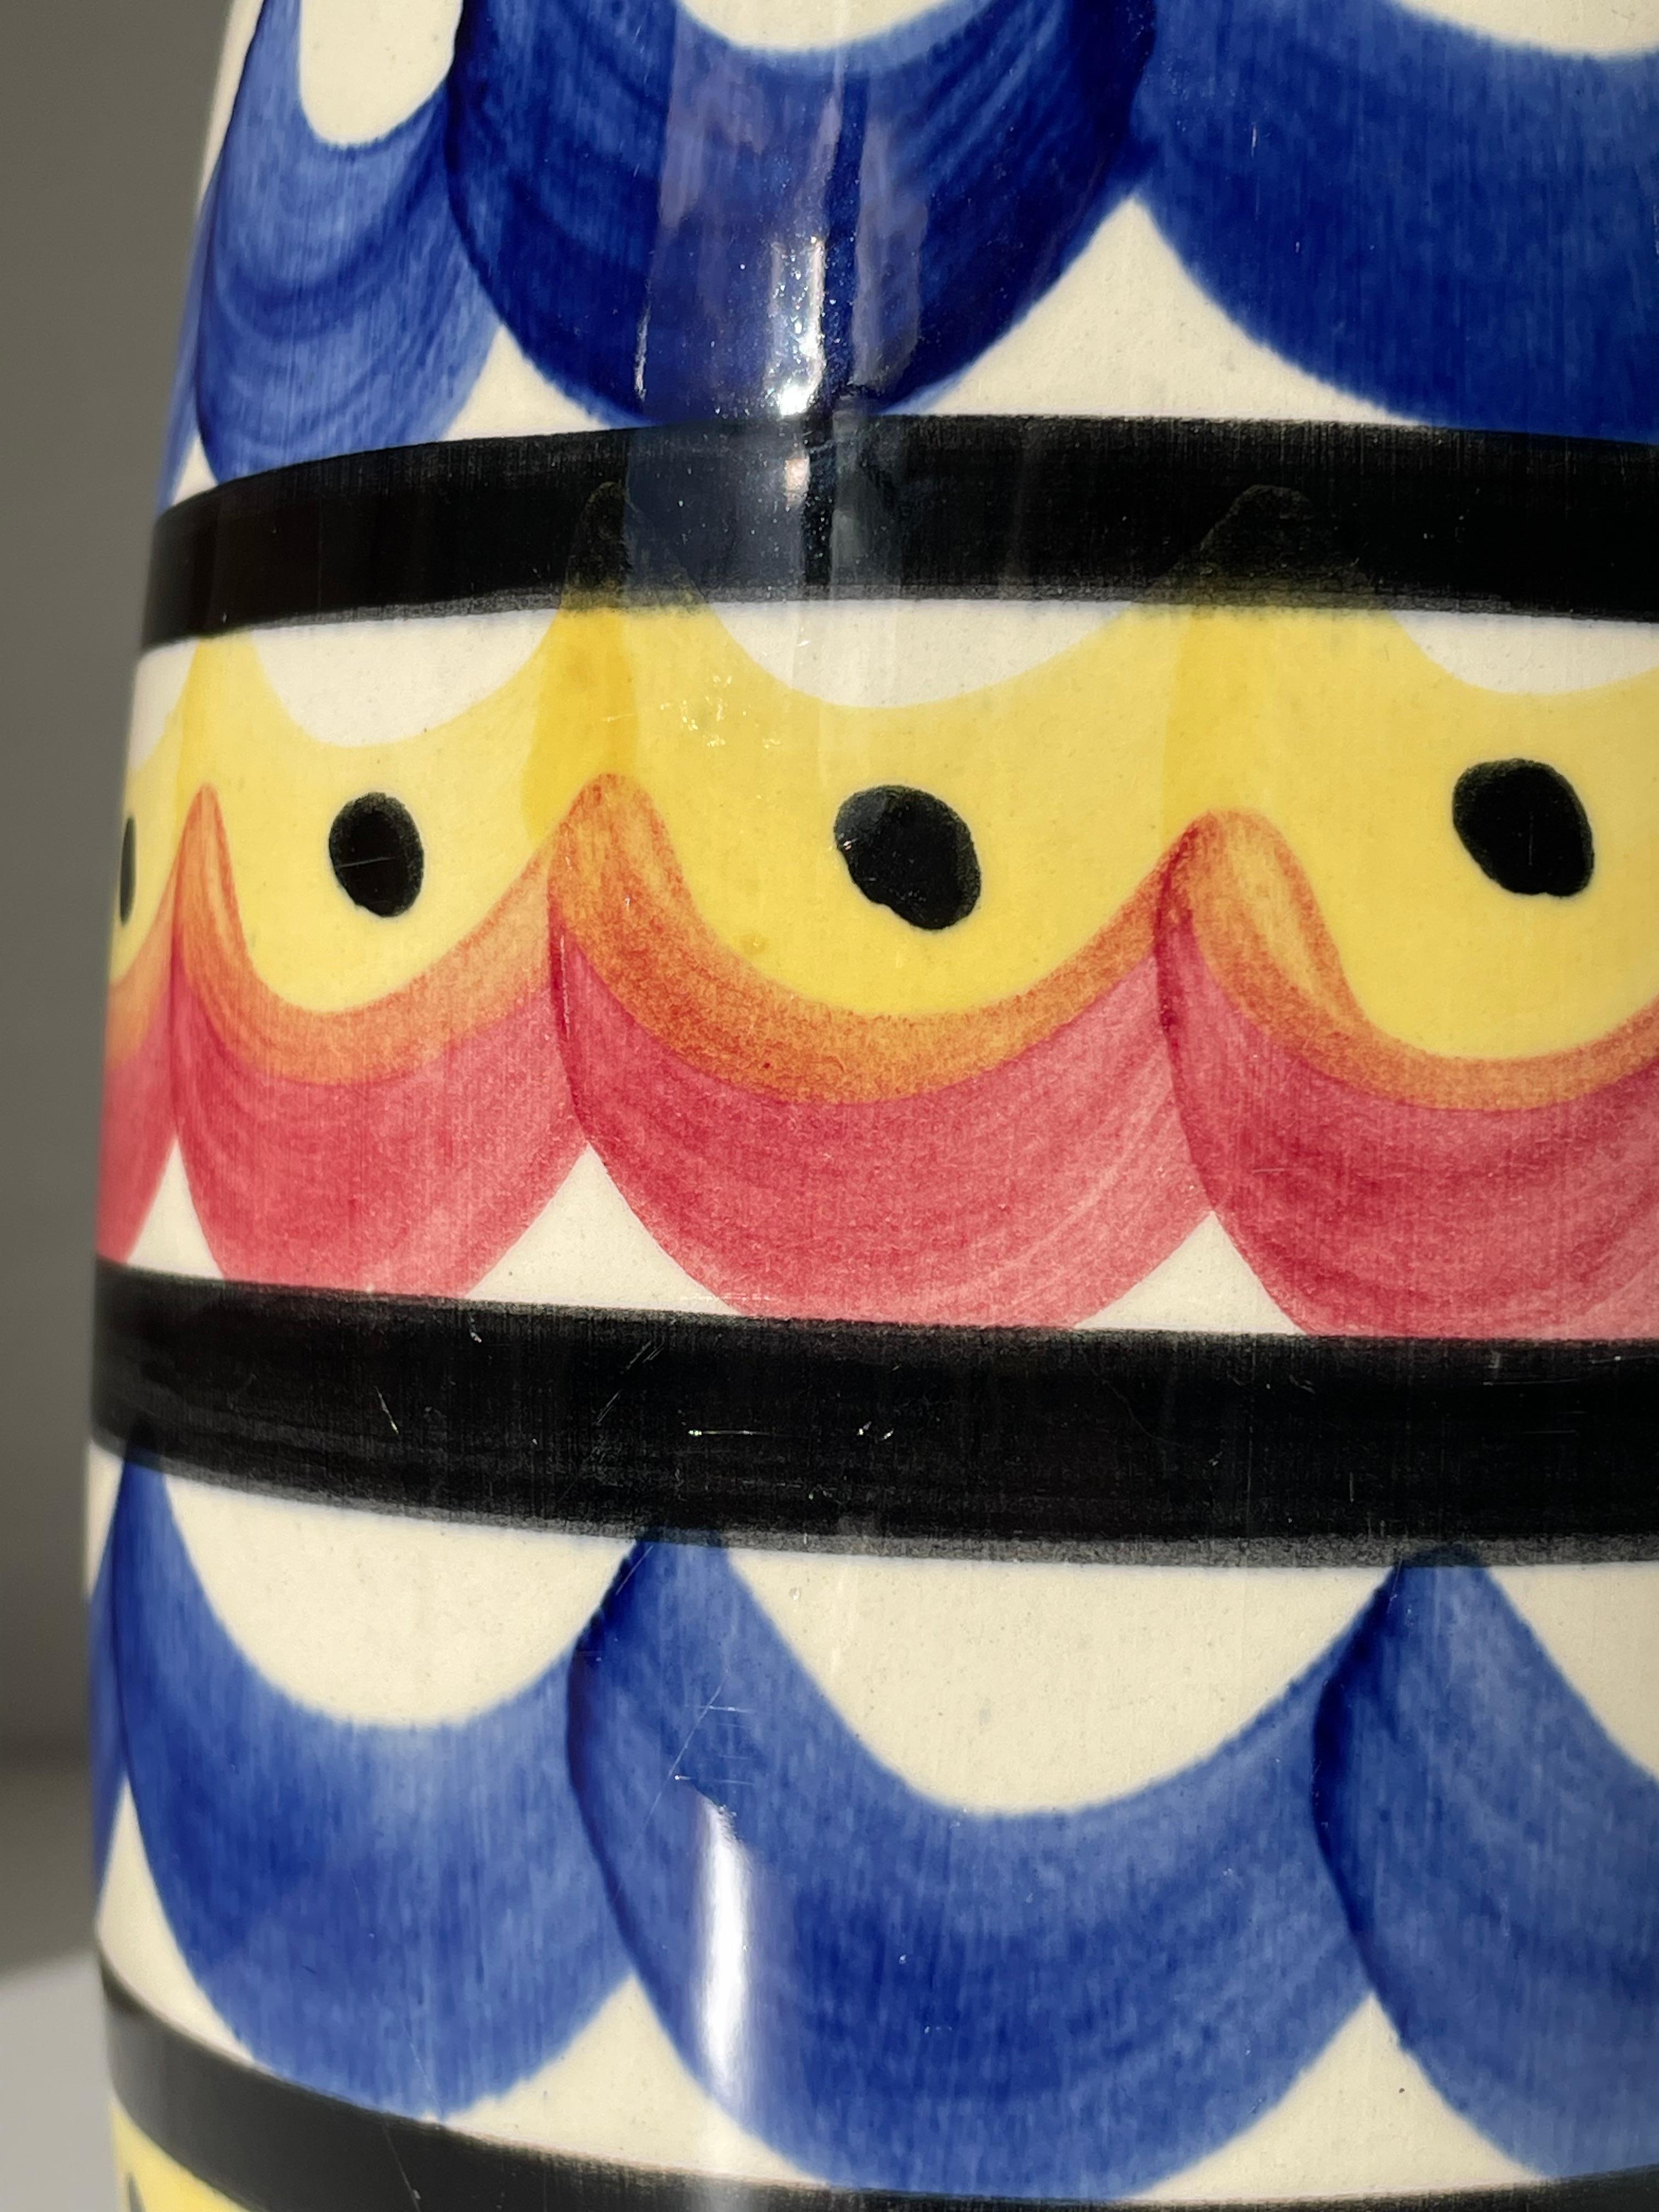 German Large Strehla Colorful Maximalist Vase by Strehla, 1970s For Sale